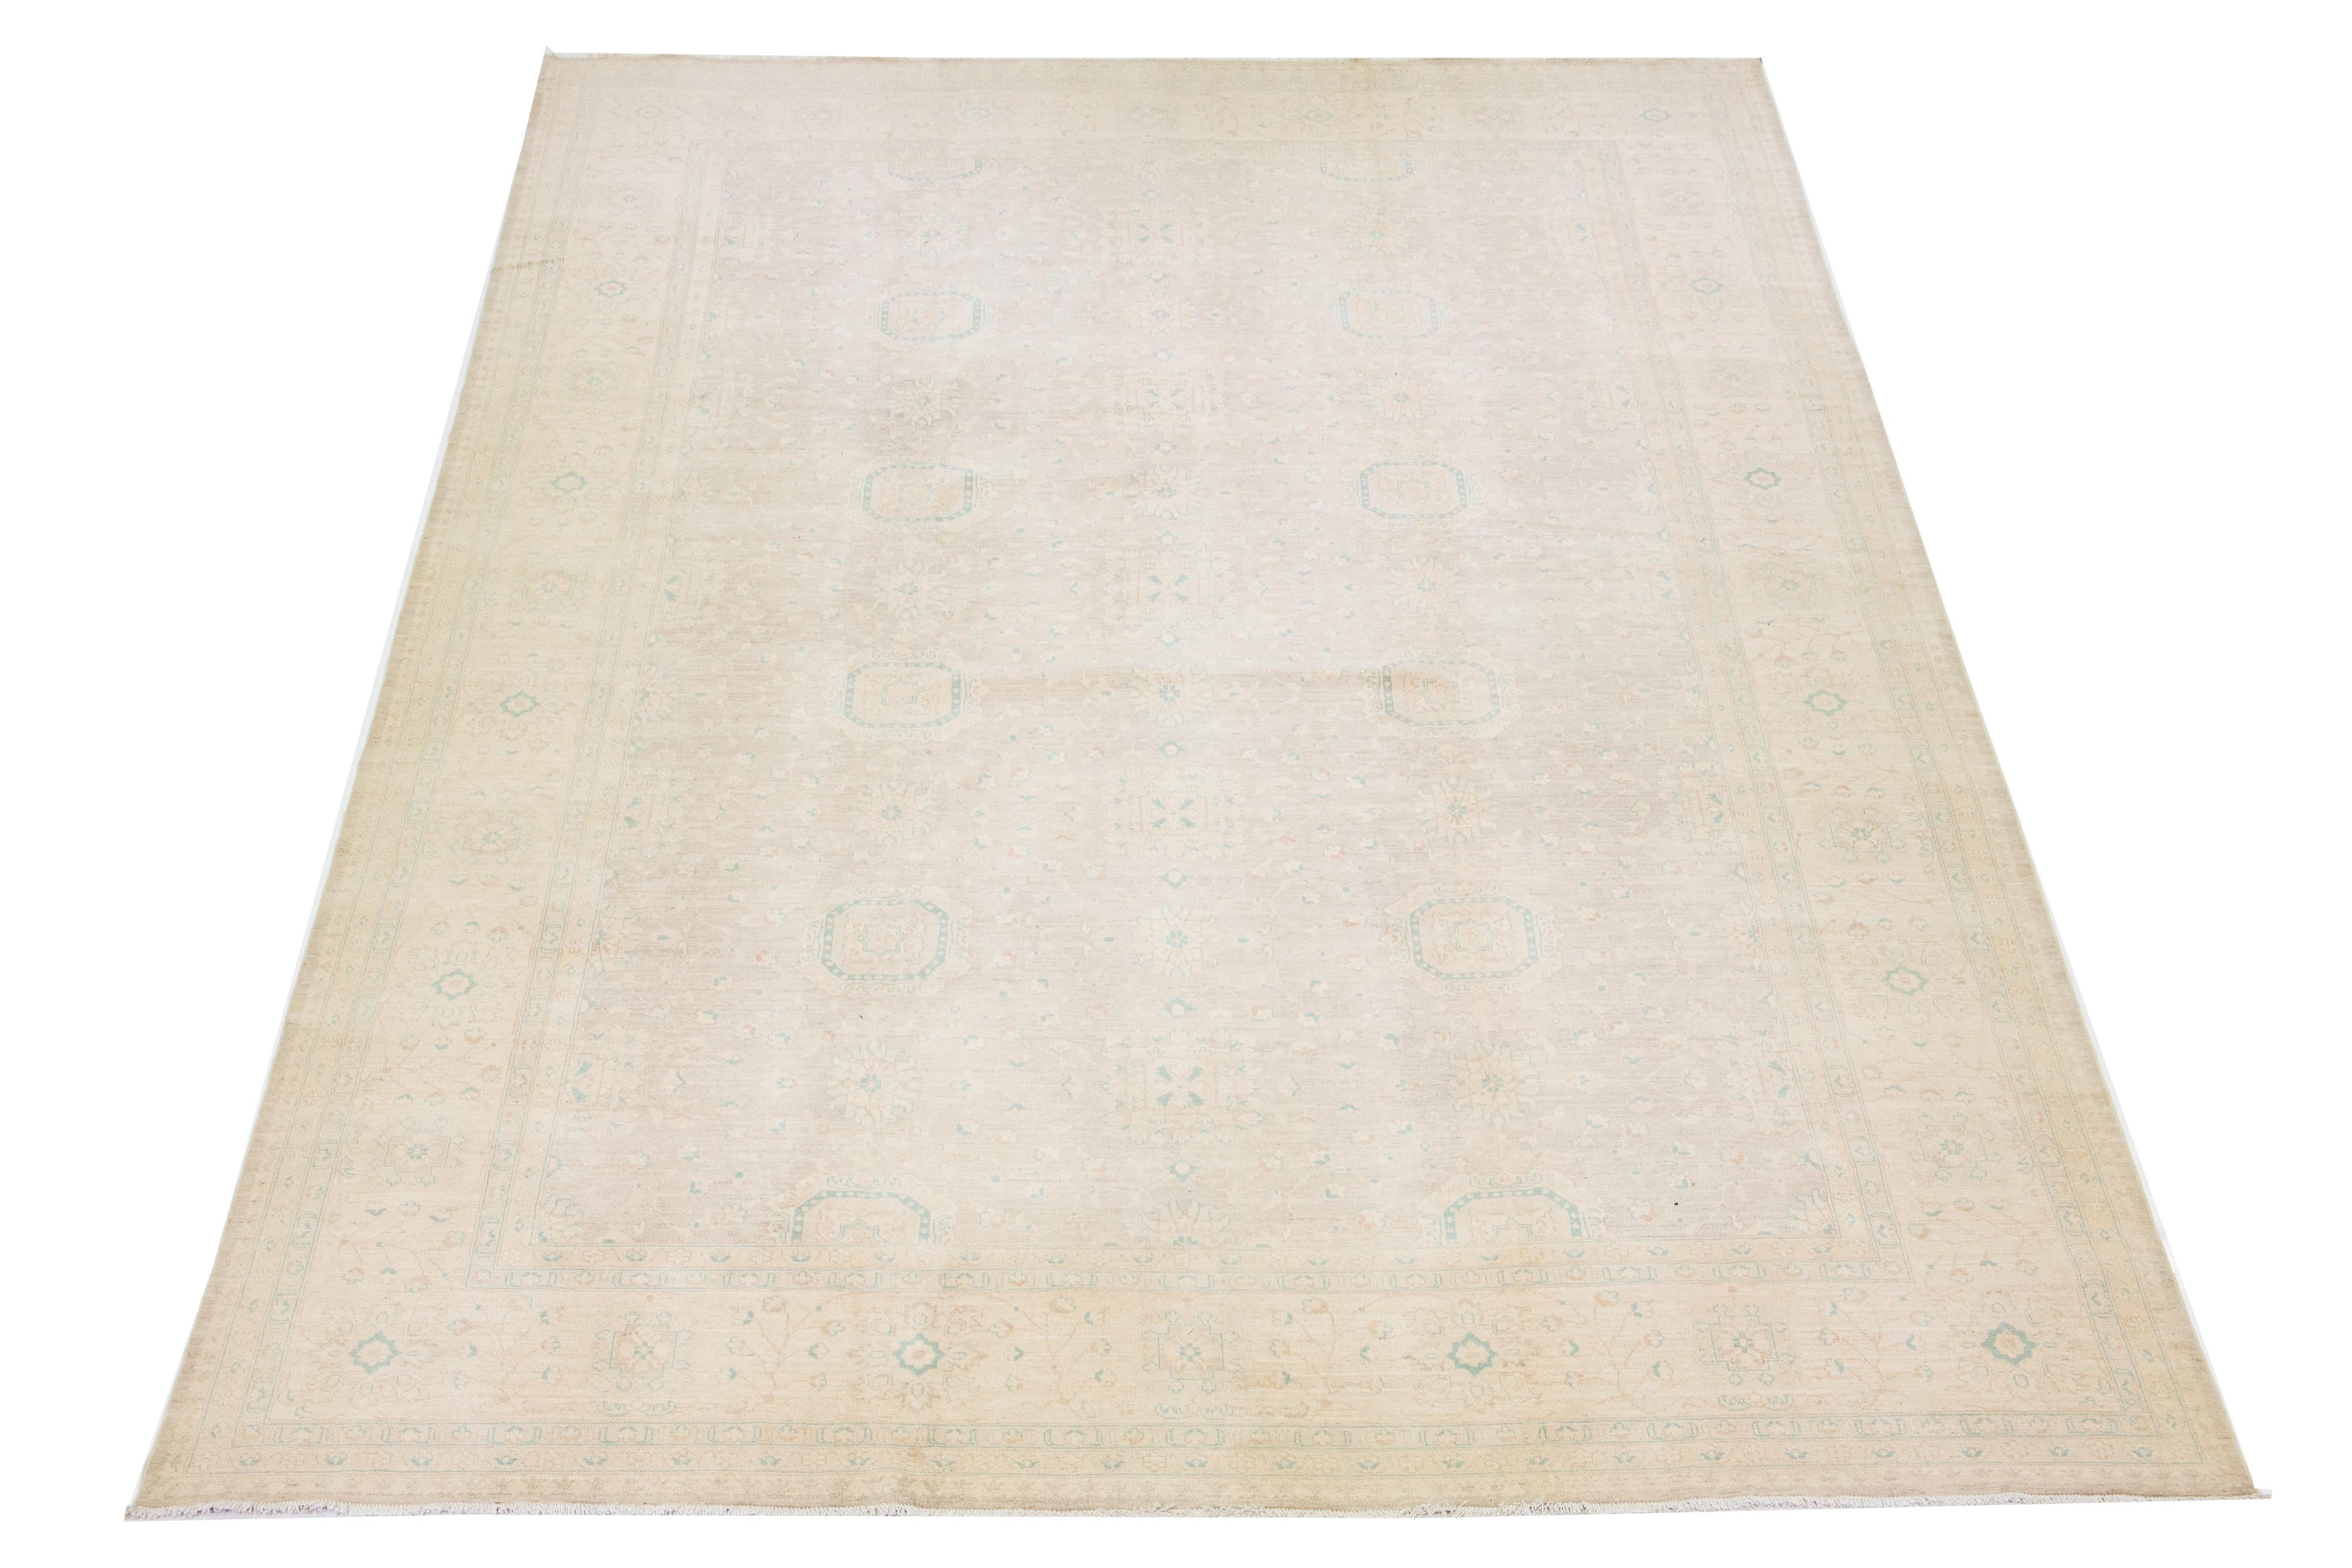 Beautiful modern Oushak hand-knotted wool rug with a beige color field. This Piece has brown and green accent colors in a gorgeous all-over floral design.

This rug measures: 12'1